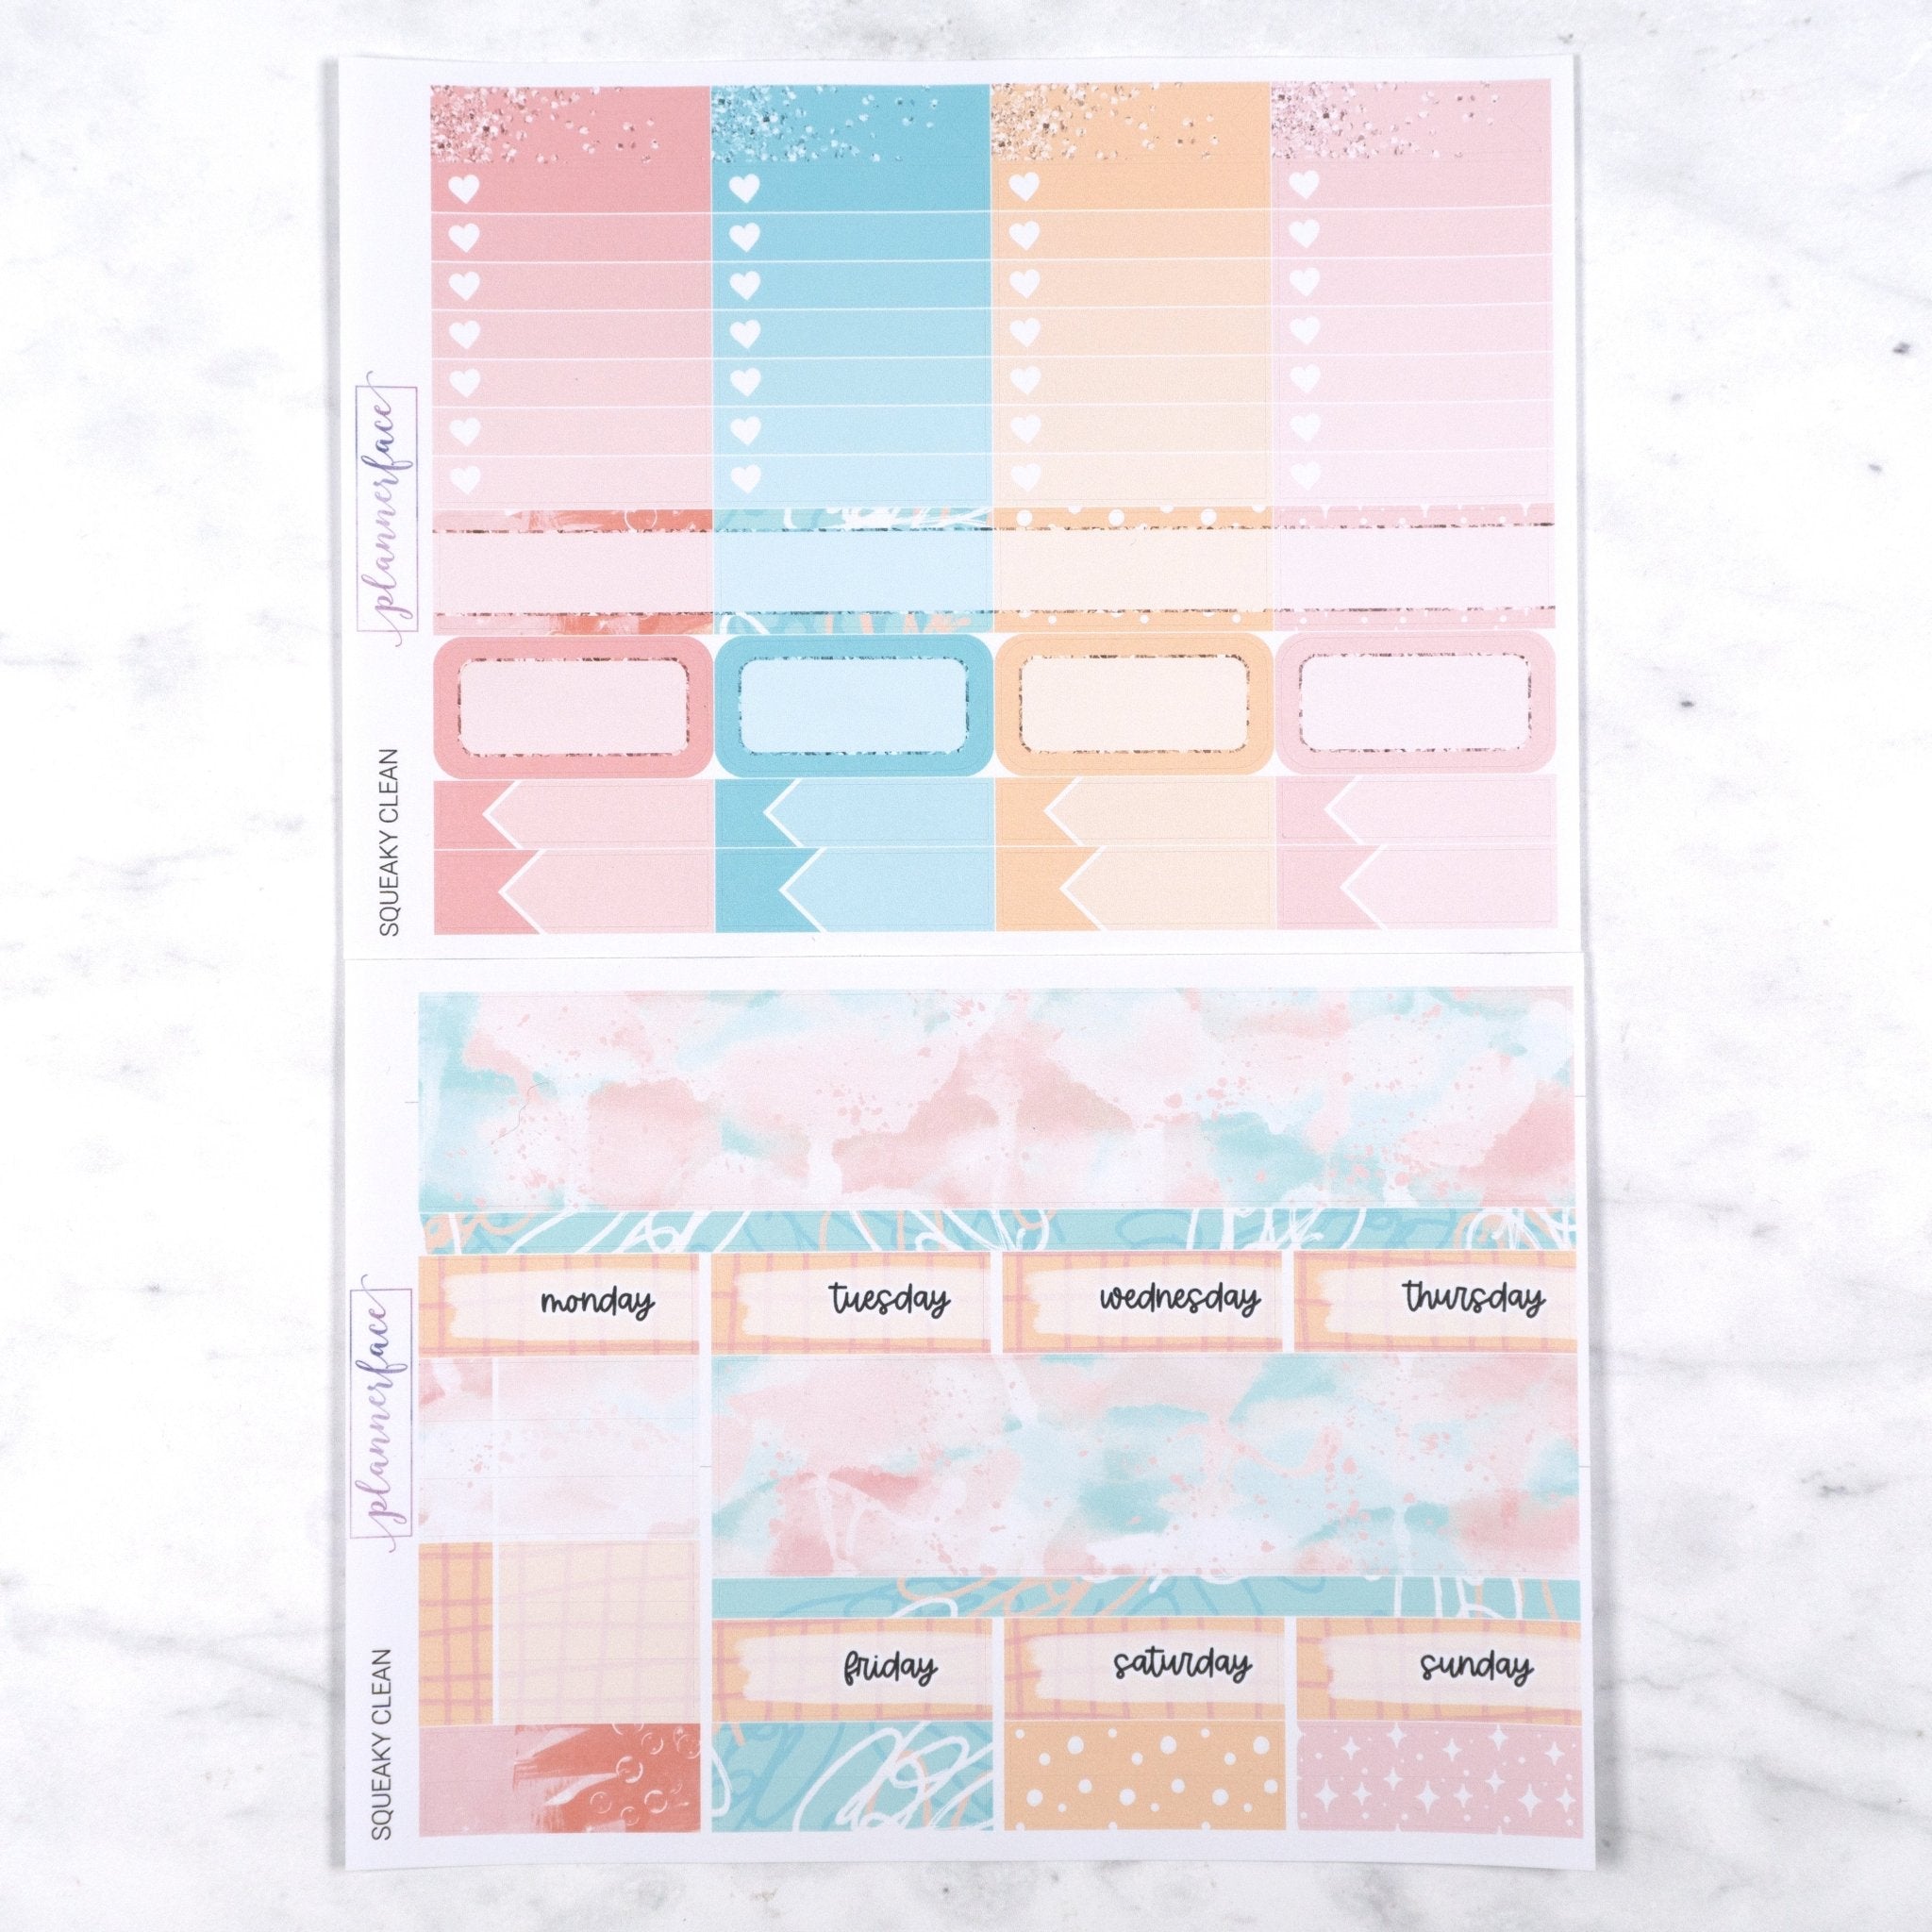 Squeaky Clean Weekly Kit by Plannerface